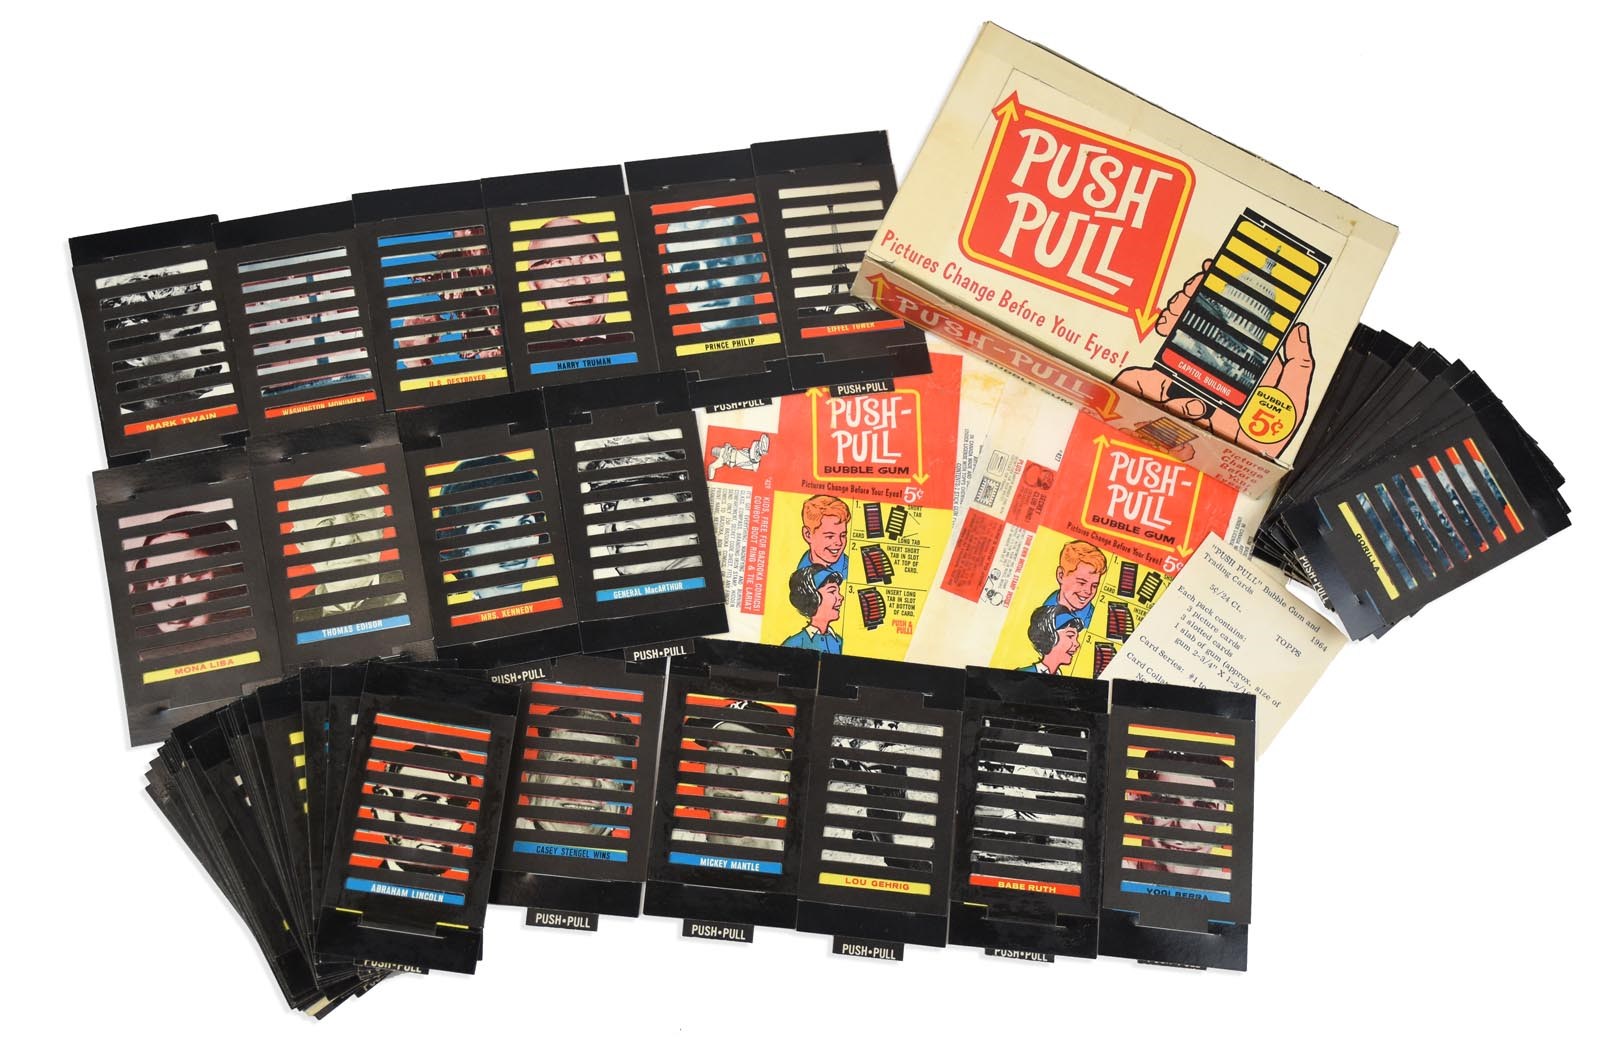 1965 Topps Push-Pull Sets, Wrappers & Box From The Fleer Archive